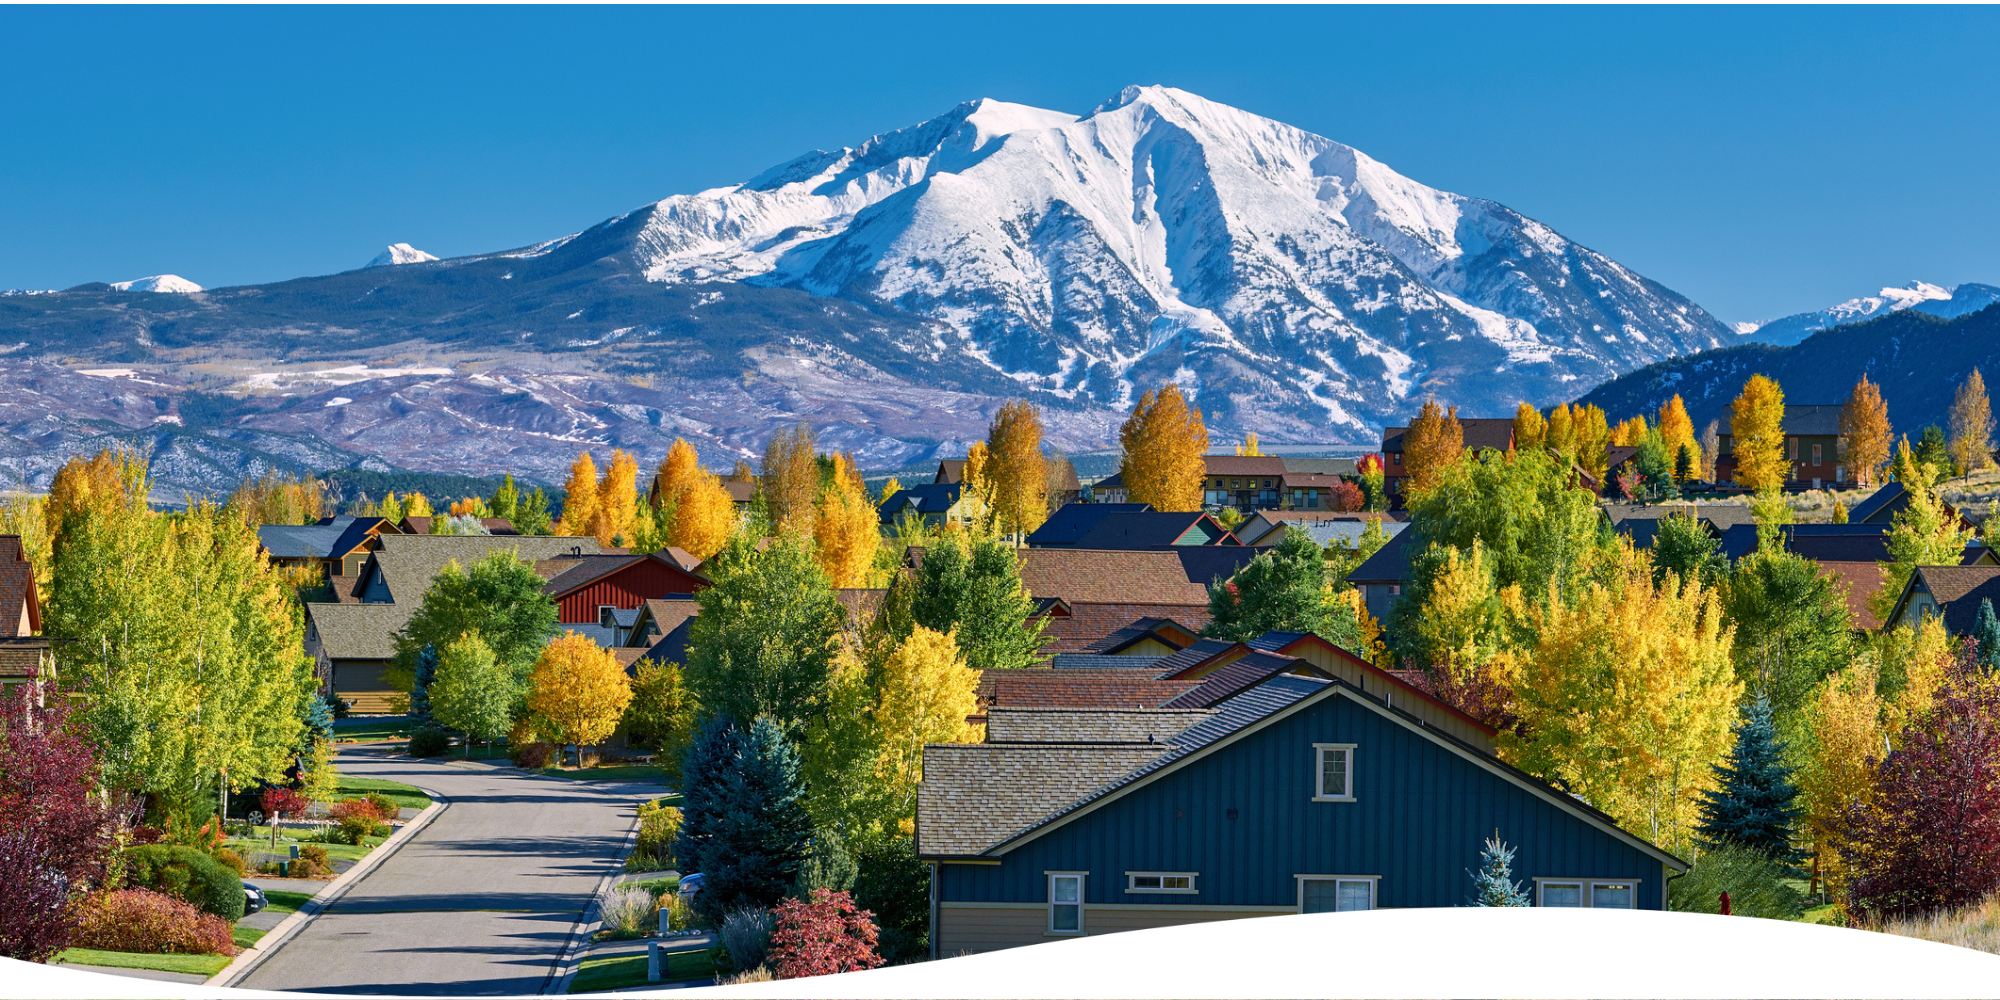 Colorado Renters Insurance: What You Need to Know. A Colorado suburb beneath the Rocky Mountains.